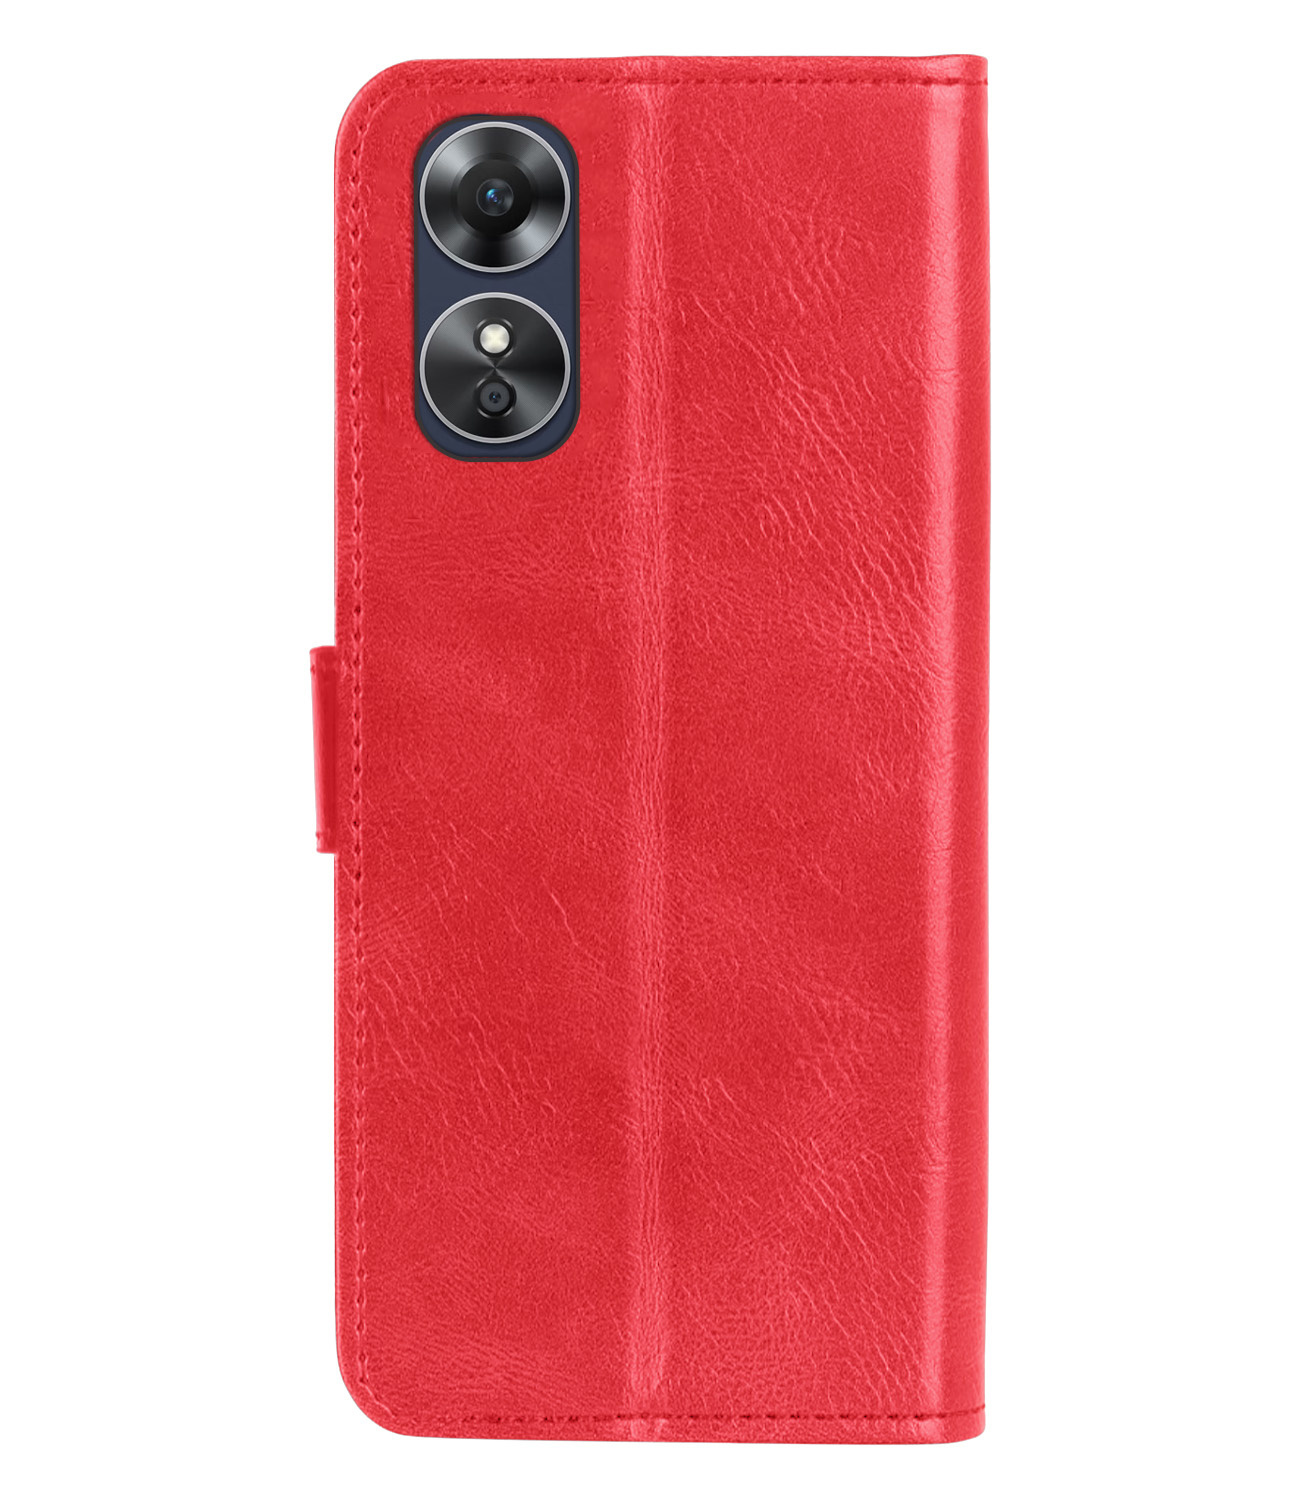 NoXx OPPO A17 Hoesje Book Case Hoes Flip Cover Bookcase Met Screenprotector - Rood